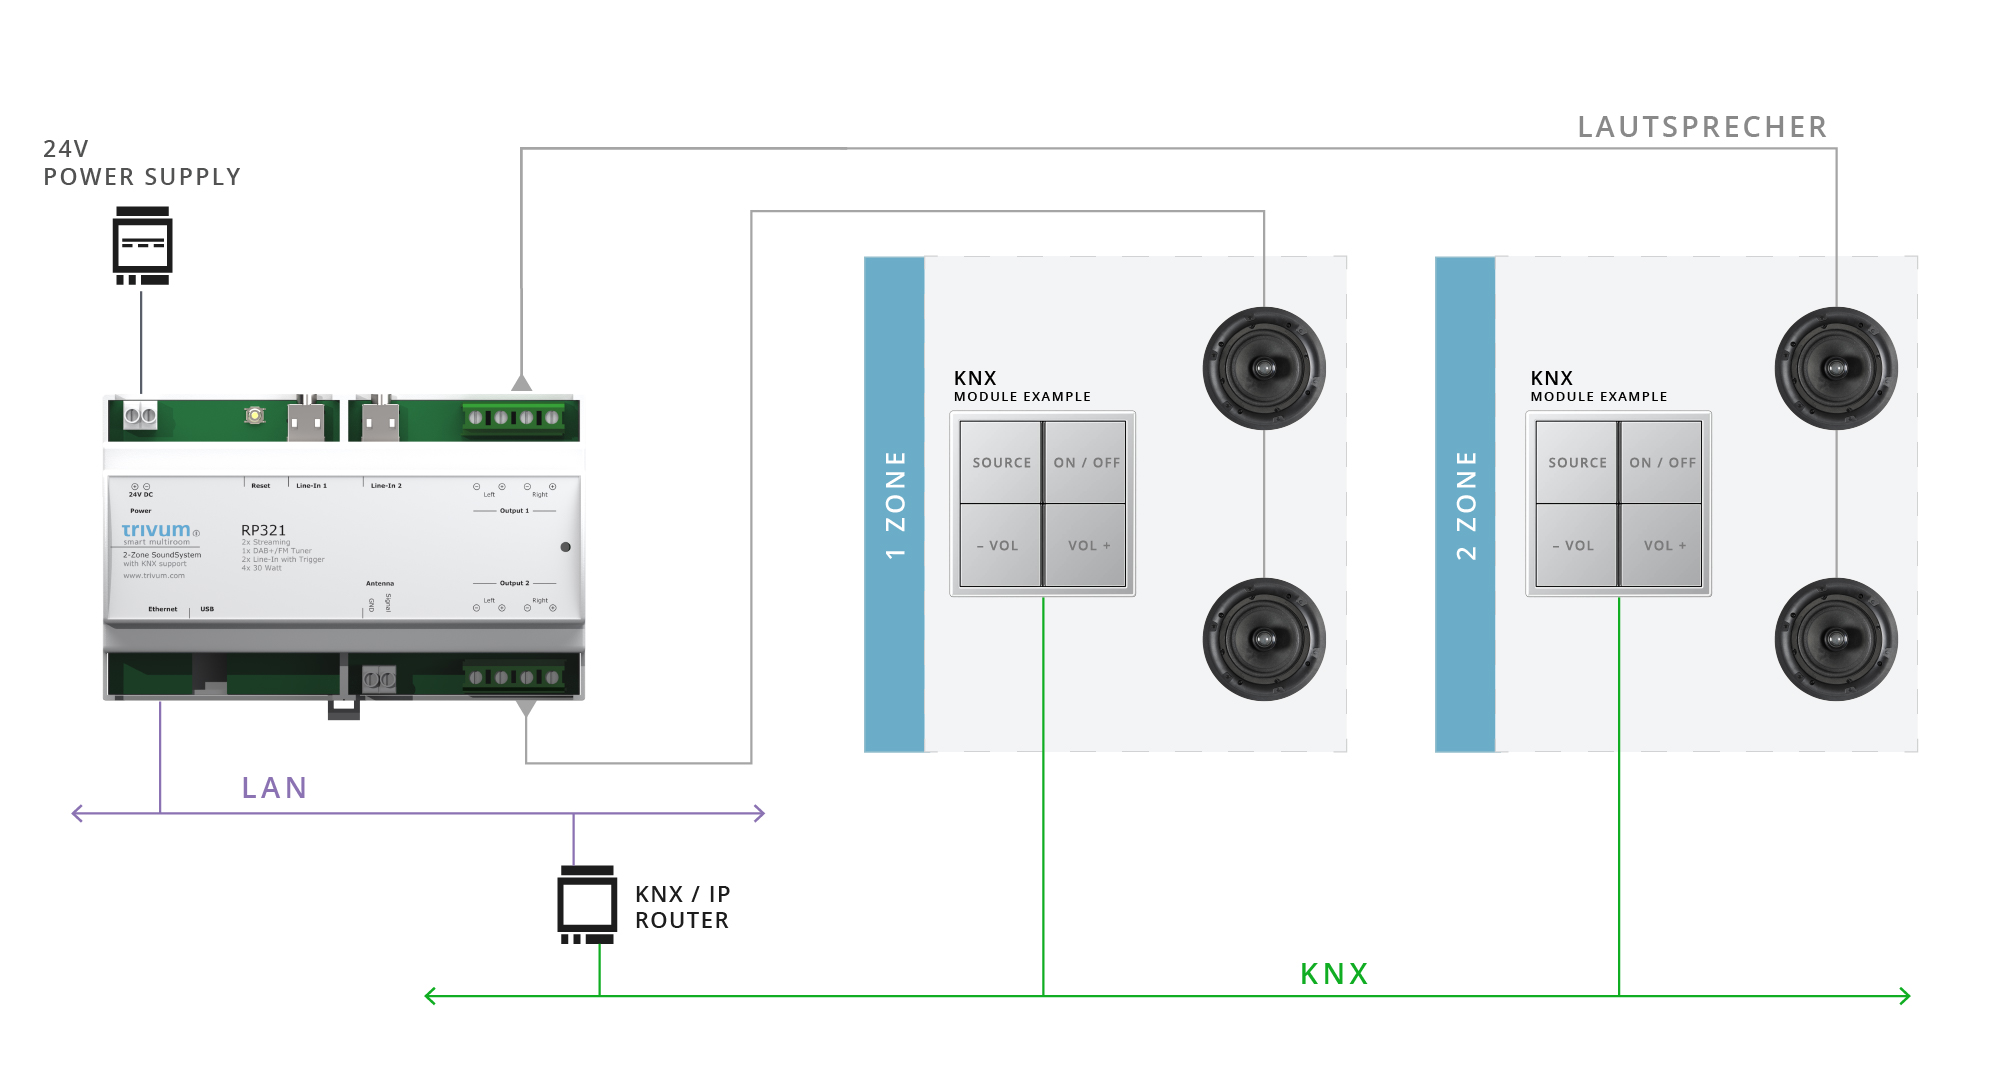 trivum can be controlled by simple KNX switches